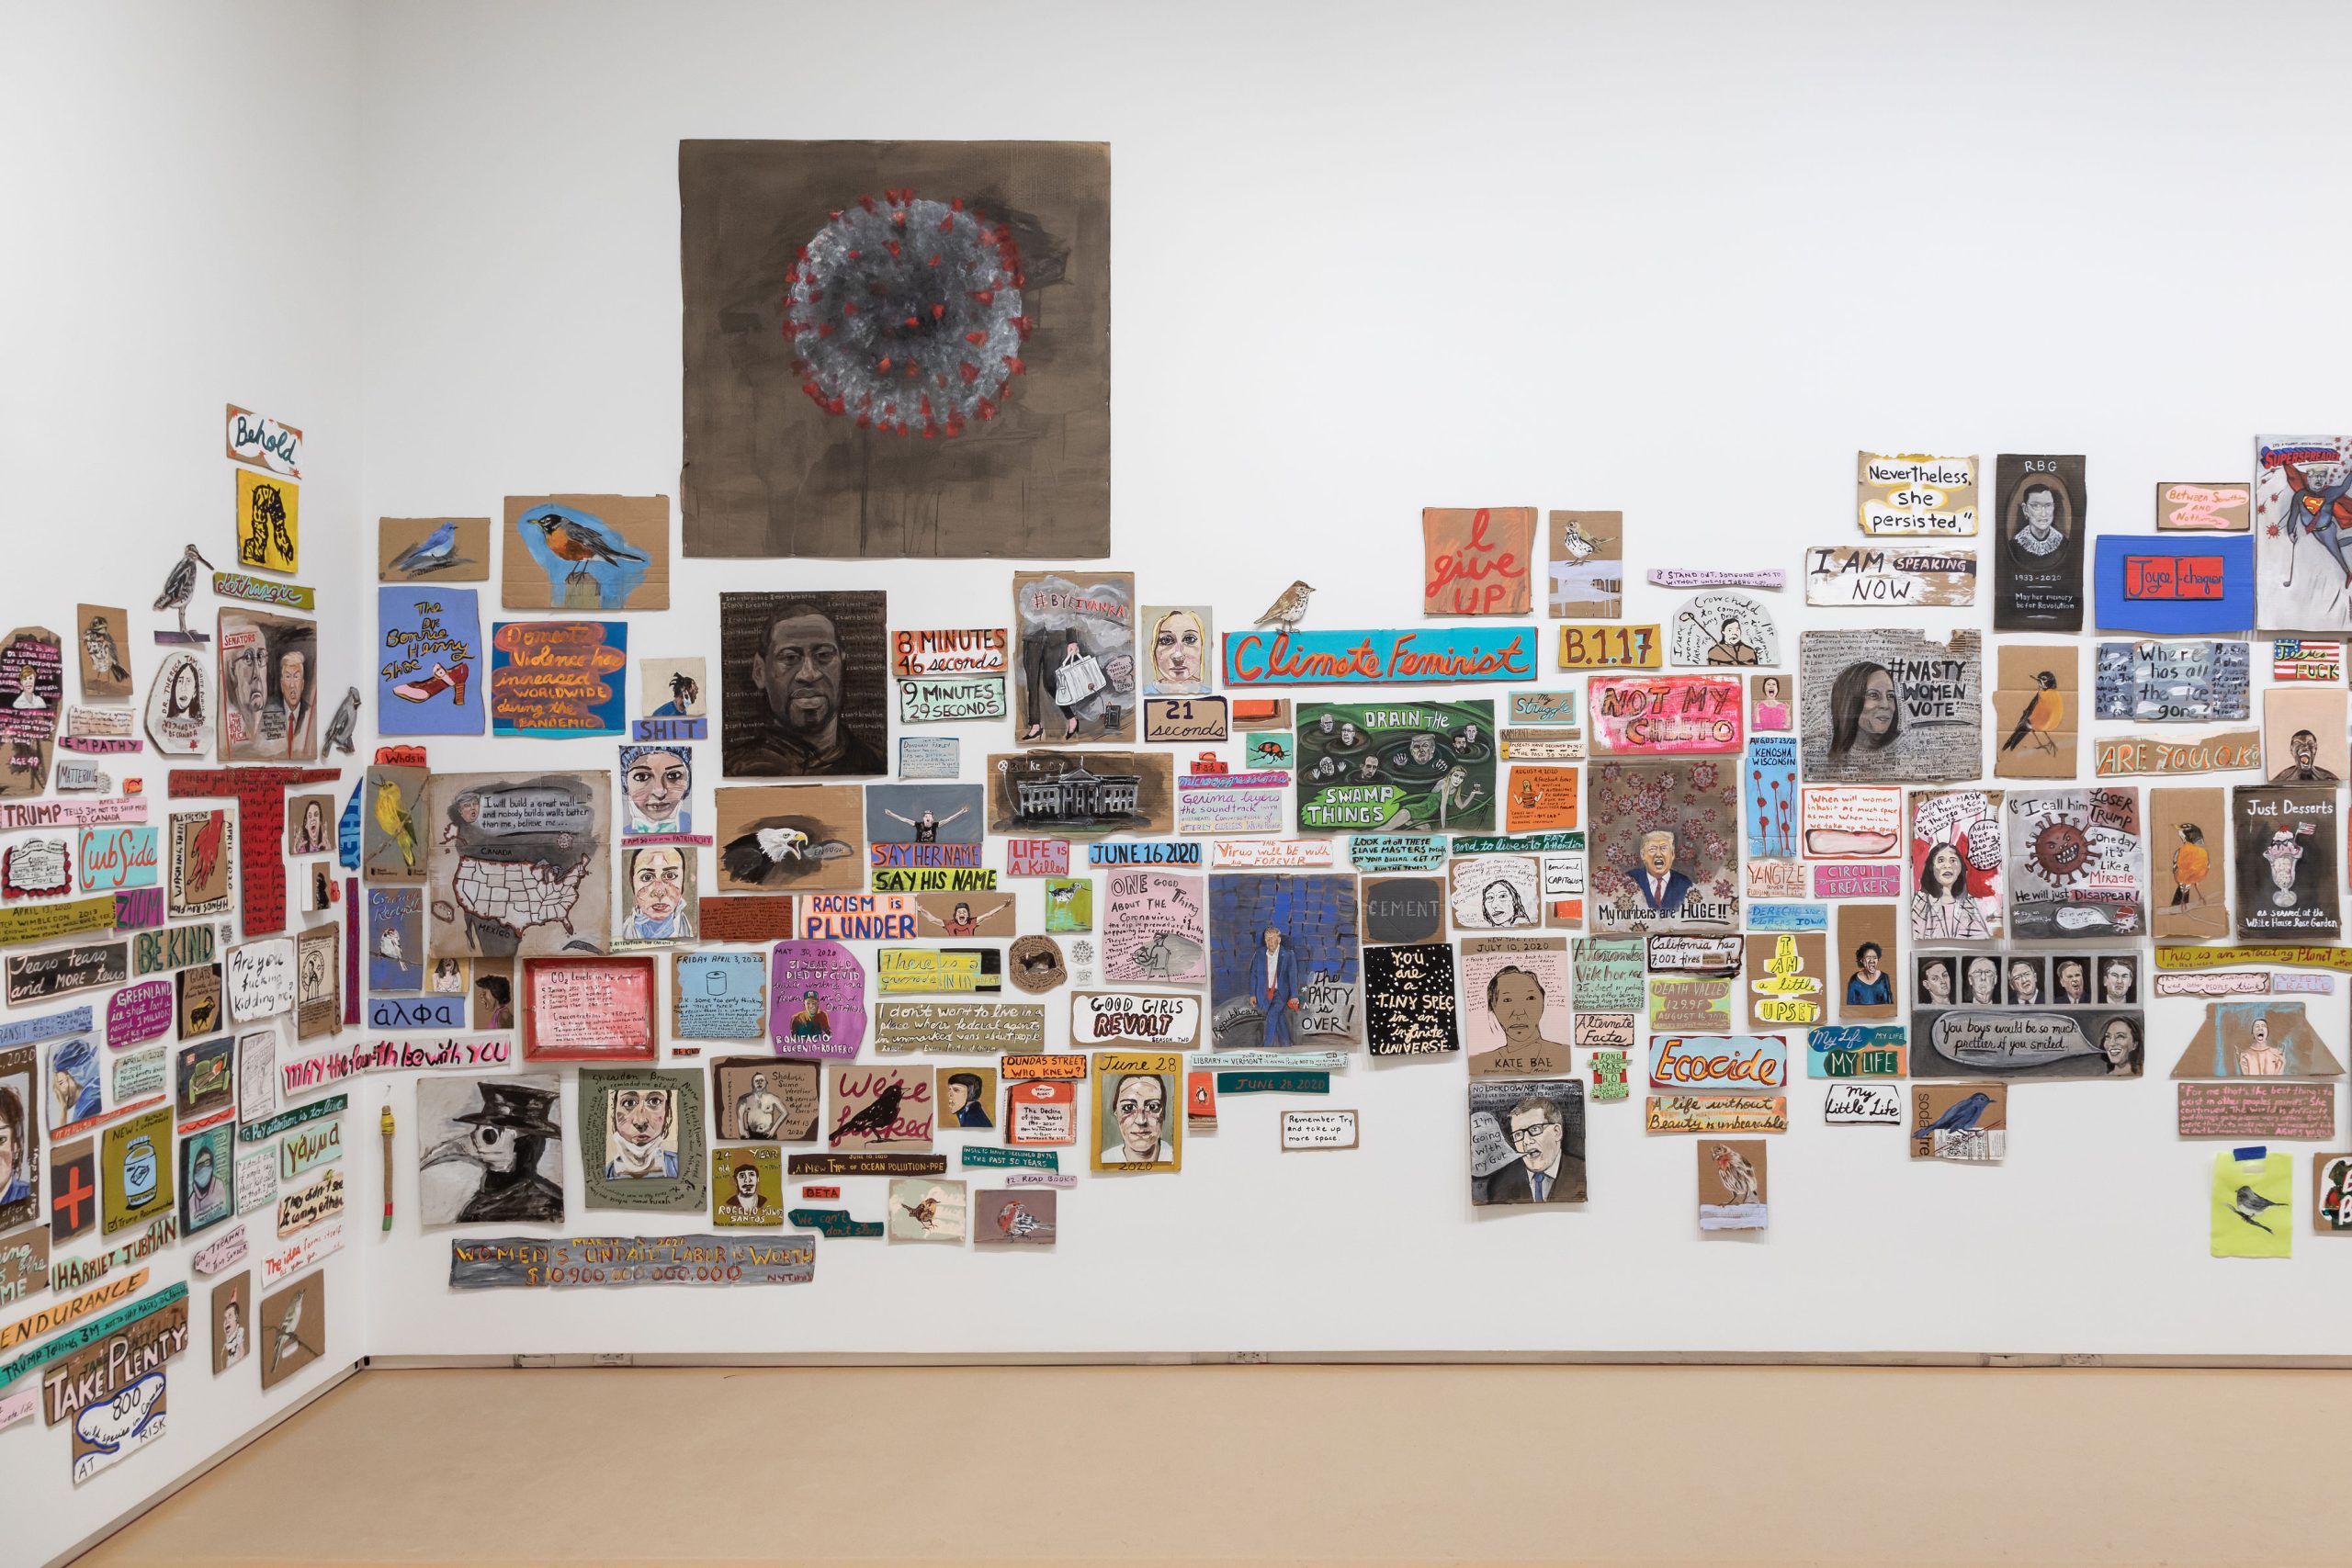 Exhibition view of Journal of the Plague Year(s). Remai Modern, 2022. Photo by Carey Shaw.